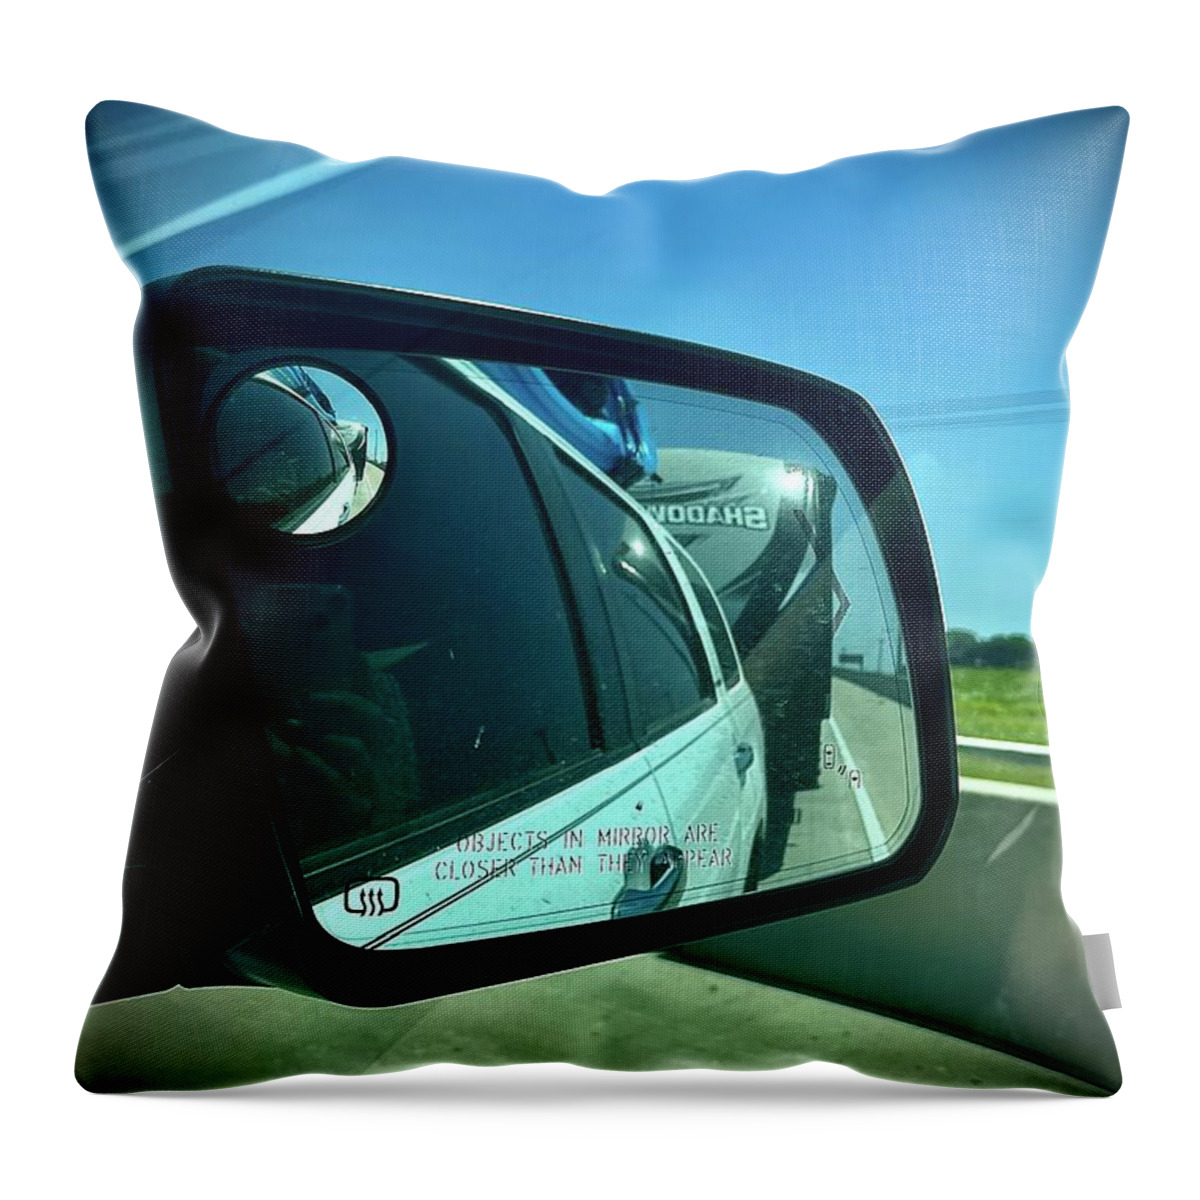  Throw Pillow featuring the photograph Objects in Mirror Are Closer Than They Appear by Donna Mibus